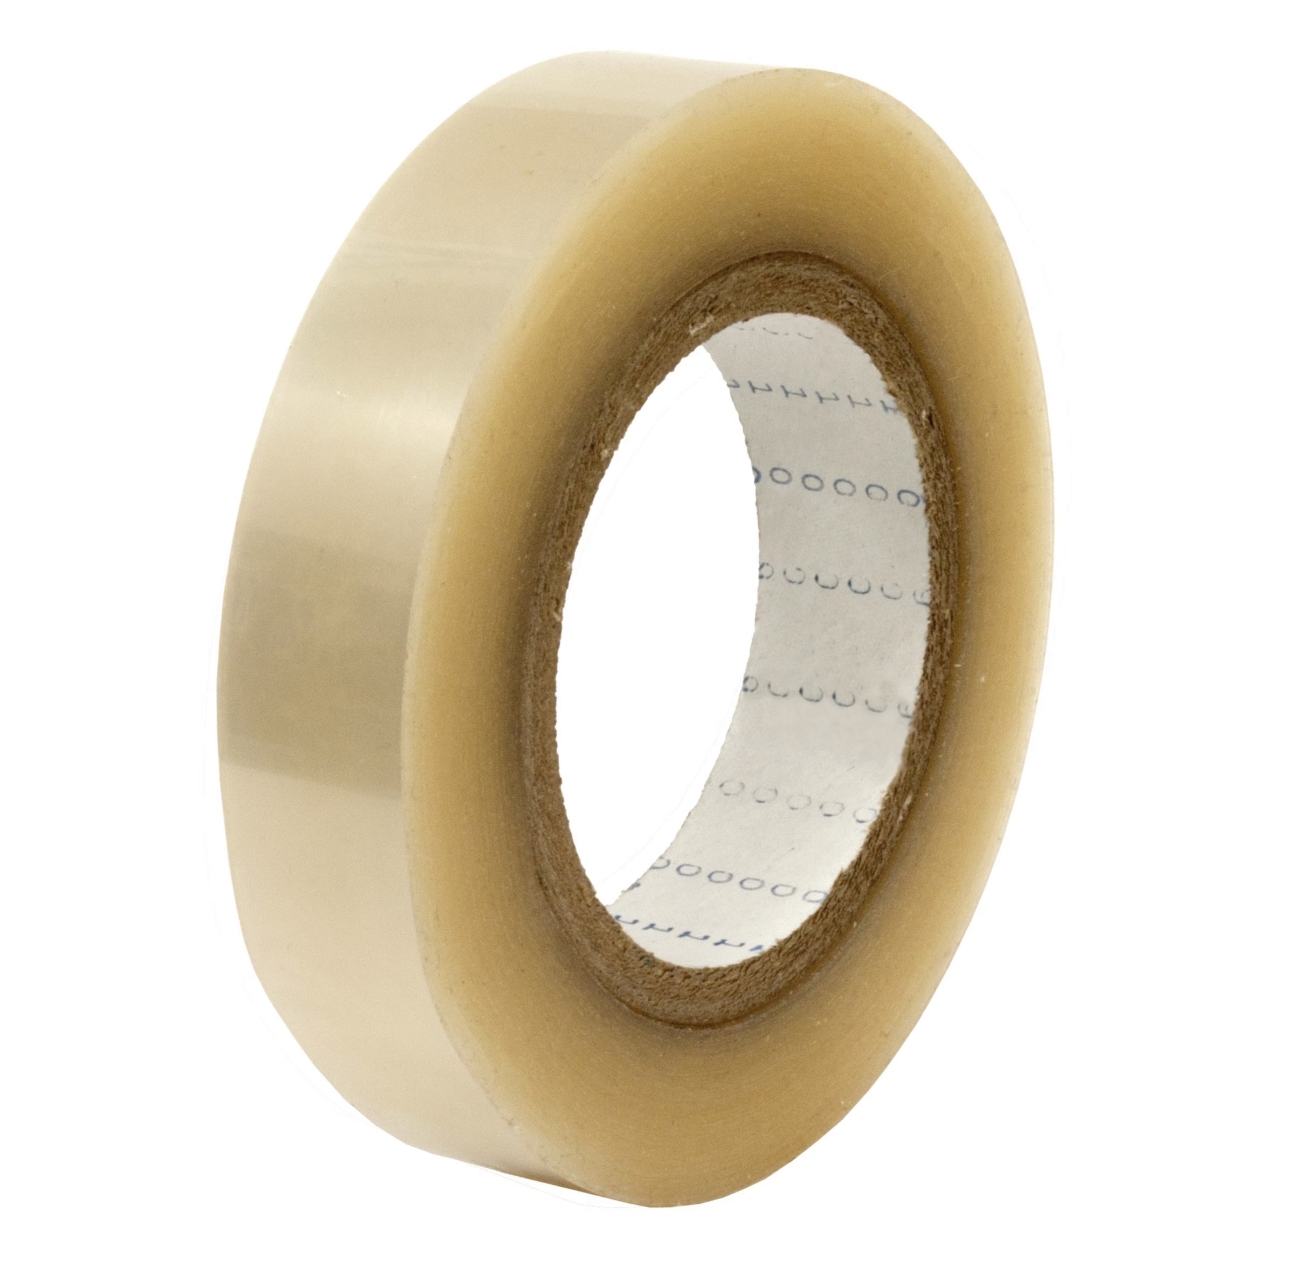 S-K-S double-sided adhesive tape with polyester backing 960, transparent, 75 mm x 66 m, silicone adhesive, 0.085 mm